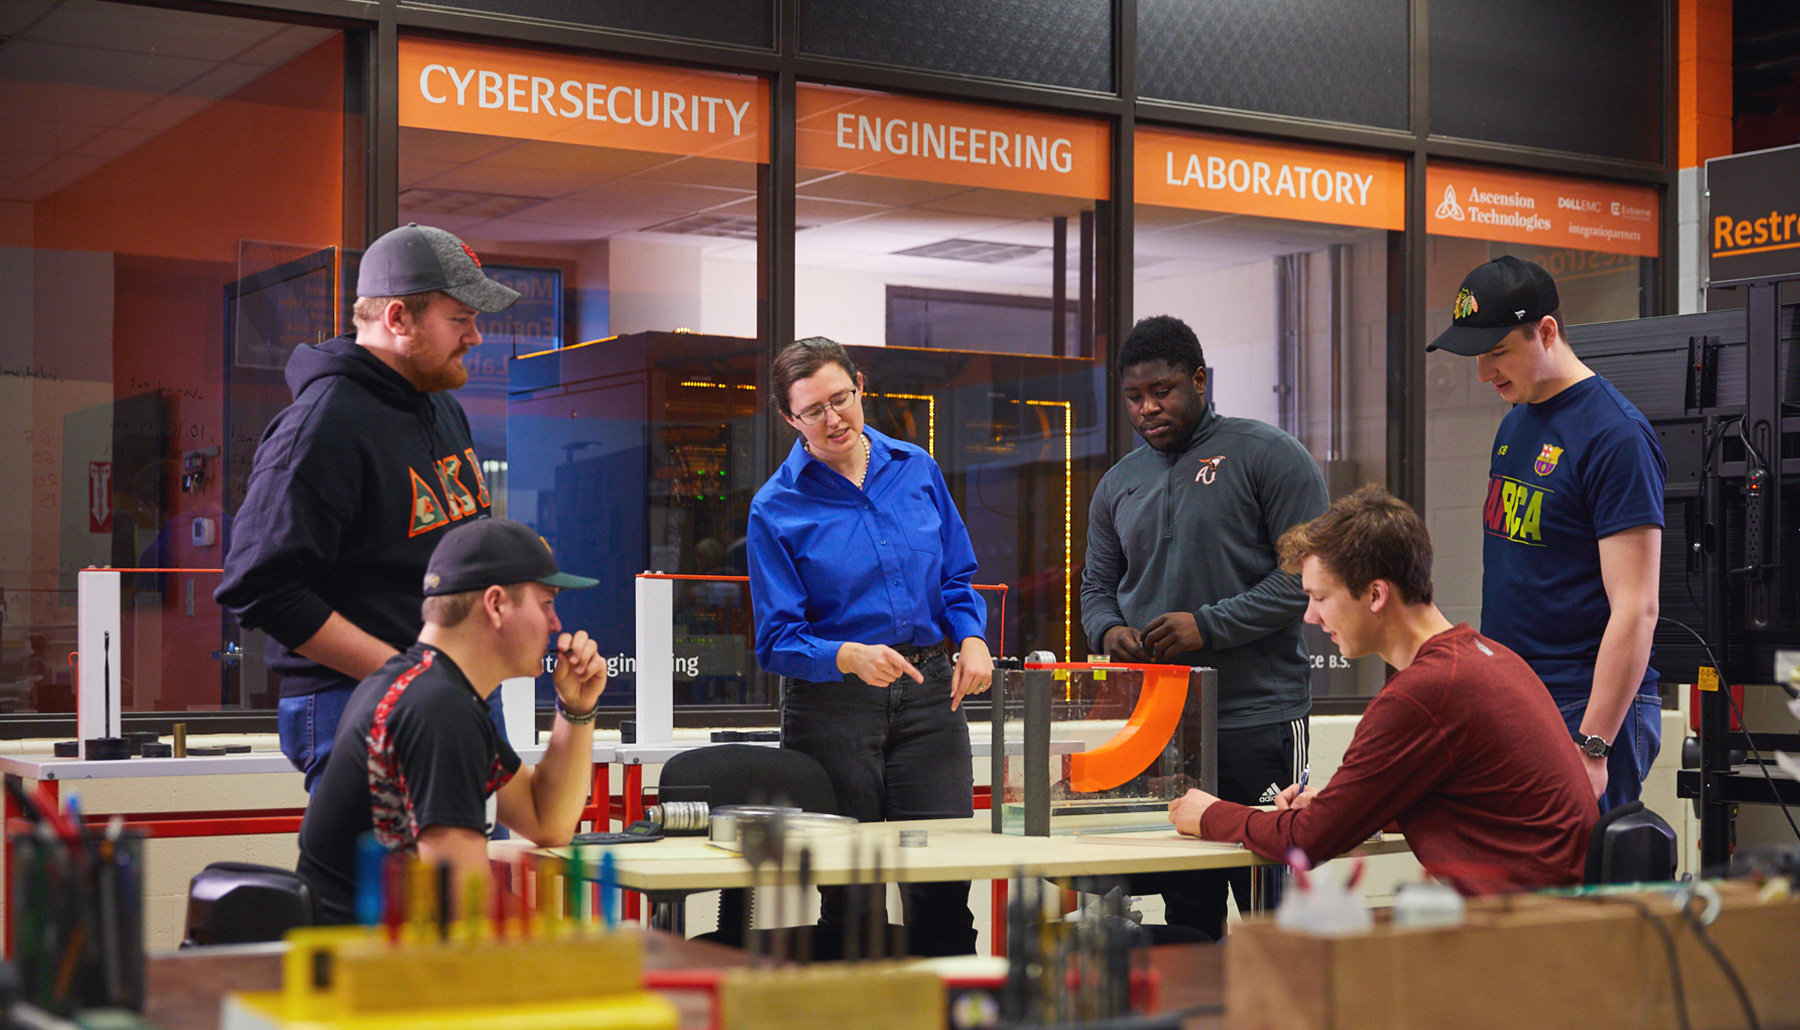 Three students stand among the servers in the Cybersecurity Engineering Lab